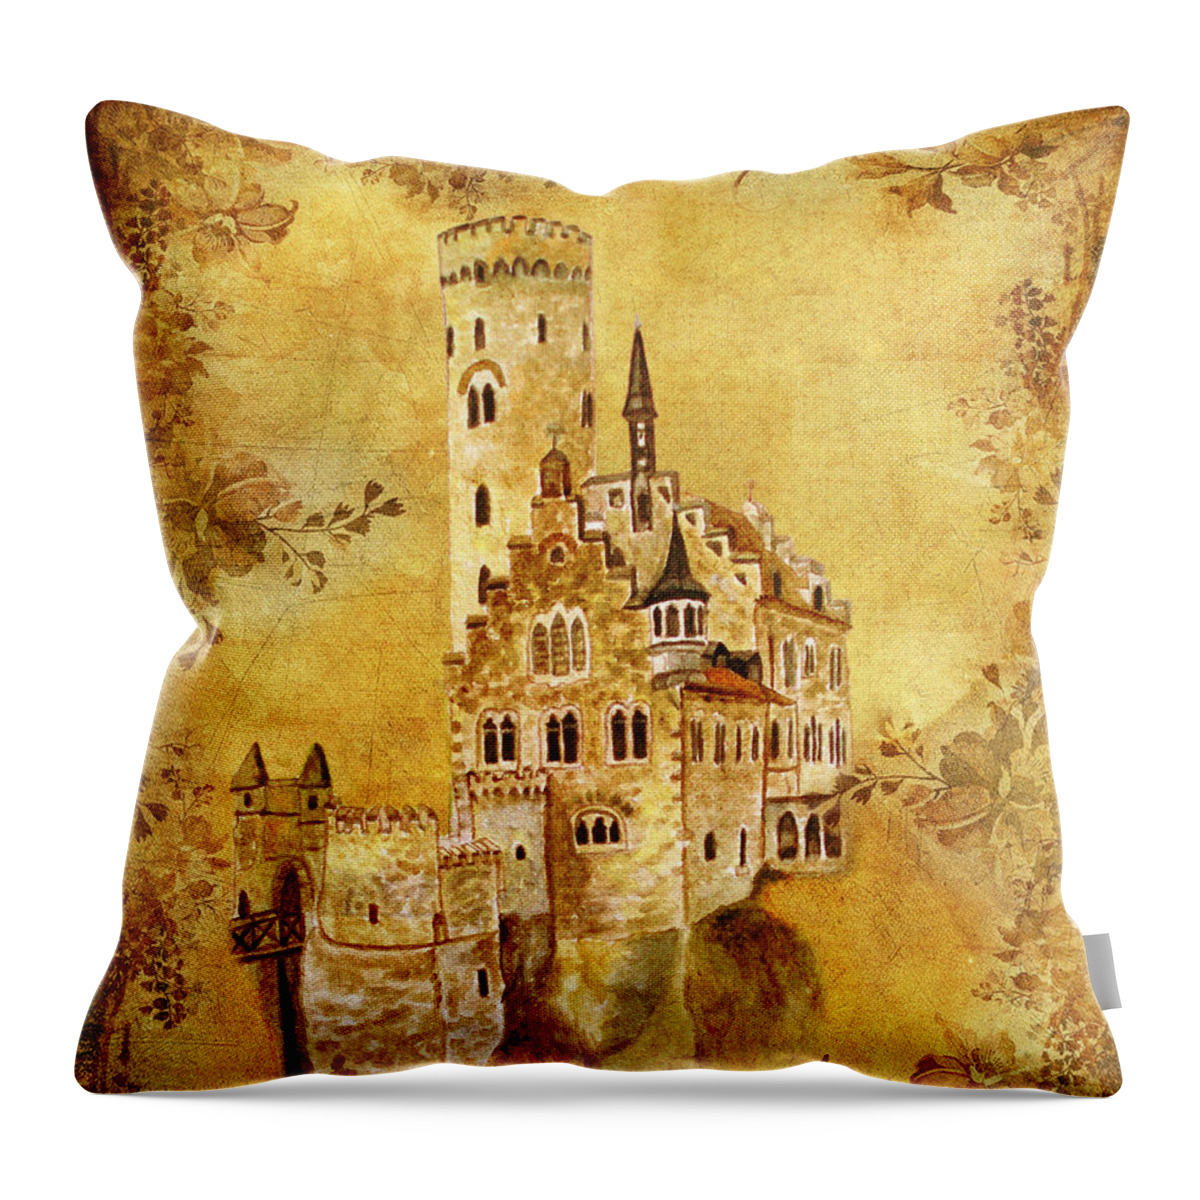 Castles Throw Pillow featuring the painting Medieval Golden Castle by Angeles M Pomata